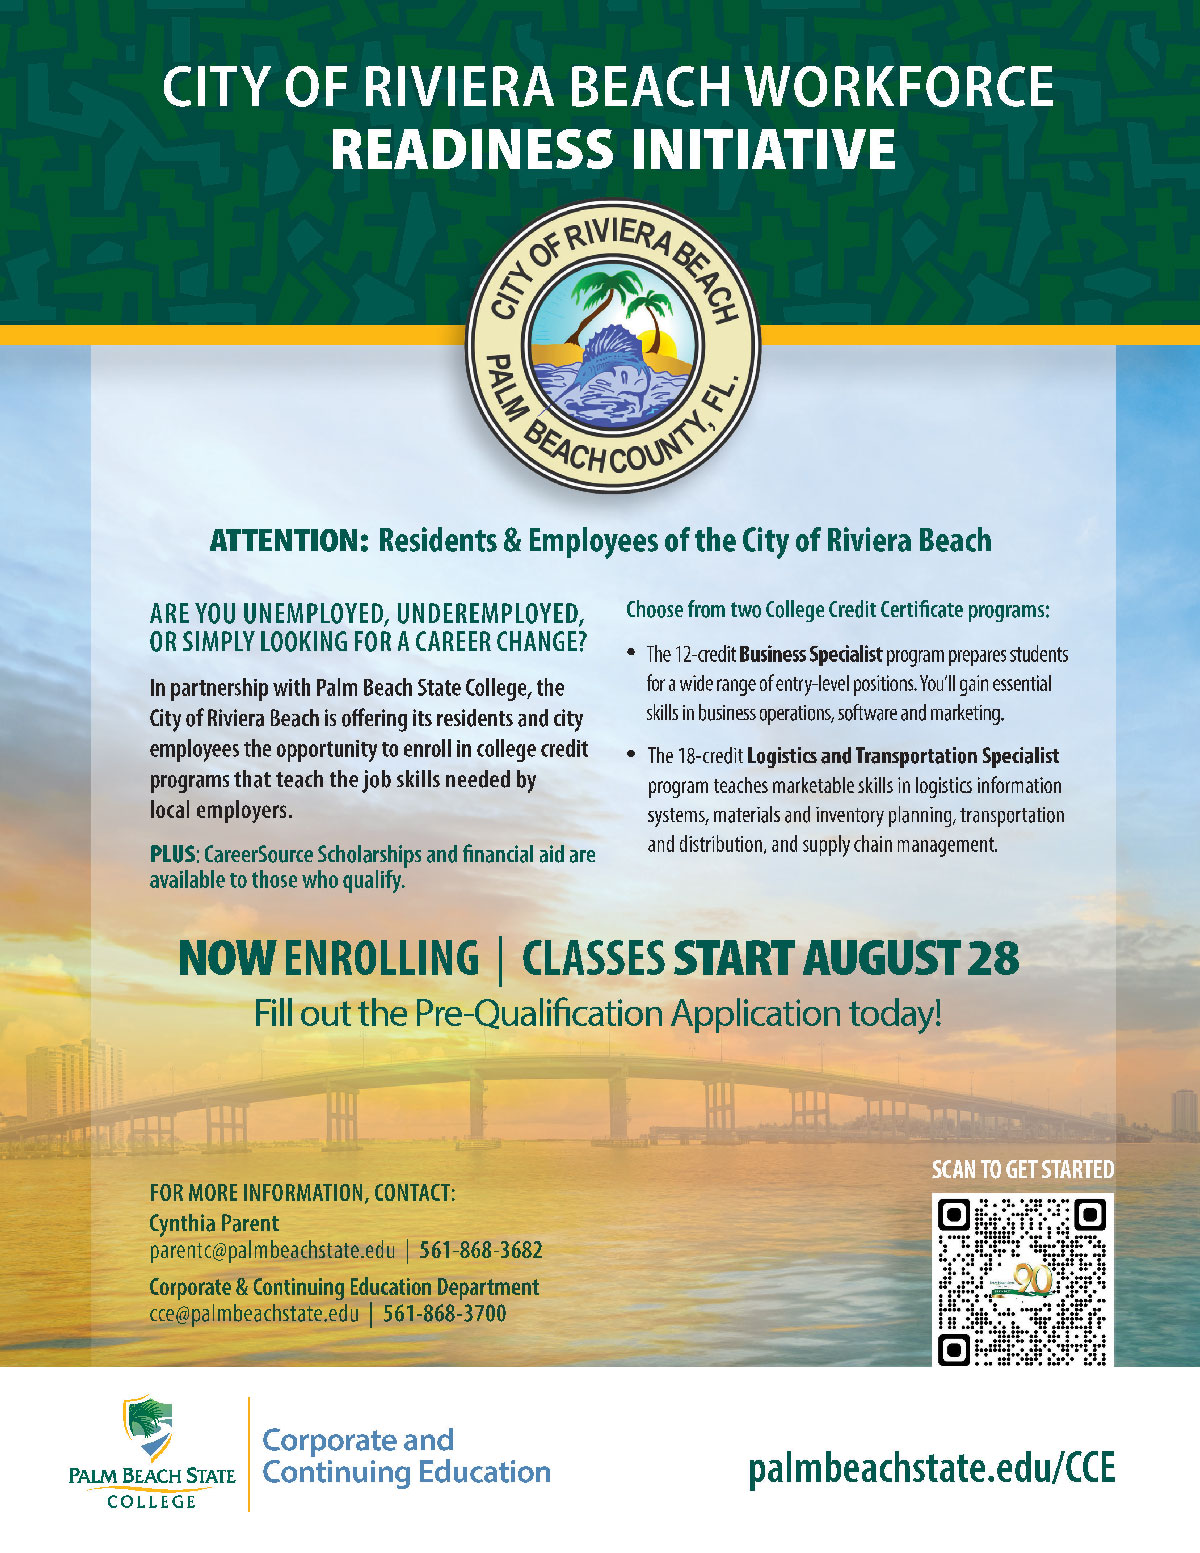 ARE YOU UNEMPLOYED, UNDEREMPLOYED, OR SIMPLY LOOKING FOR A CAREER CHANGE? In partnership with Palm Beach State College, the City of Riviera Beach is offering its residents and city employees the opportunity to enroll in college credit programs that teach the job skills needed by local employers. PLUS: CareerSource Scholarships and financial aid are available to those who qualify. Choose from two College Credit Certificate programs: • The 12-credit Business Specialist program prepares students for a wide range of entry-level positions. You’ll gain essential skills in business operations, software and marketing. • The 18-credit Logistics and Transportation Specialist program teaches marketable skills in logistics information systems, materials and inventory planning, transportation and distribution, and supply chain management. CITY OF RIVIERA BEACH WORKFORCE READINESS INITIATIVE NOW ENROLLING | CLASSES START AUGUST 28 Fill out the Pre-Qualification Application today! SCAN TO GET STARTED palmbeachstate.edu/CCE